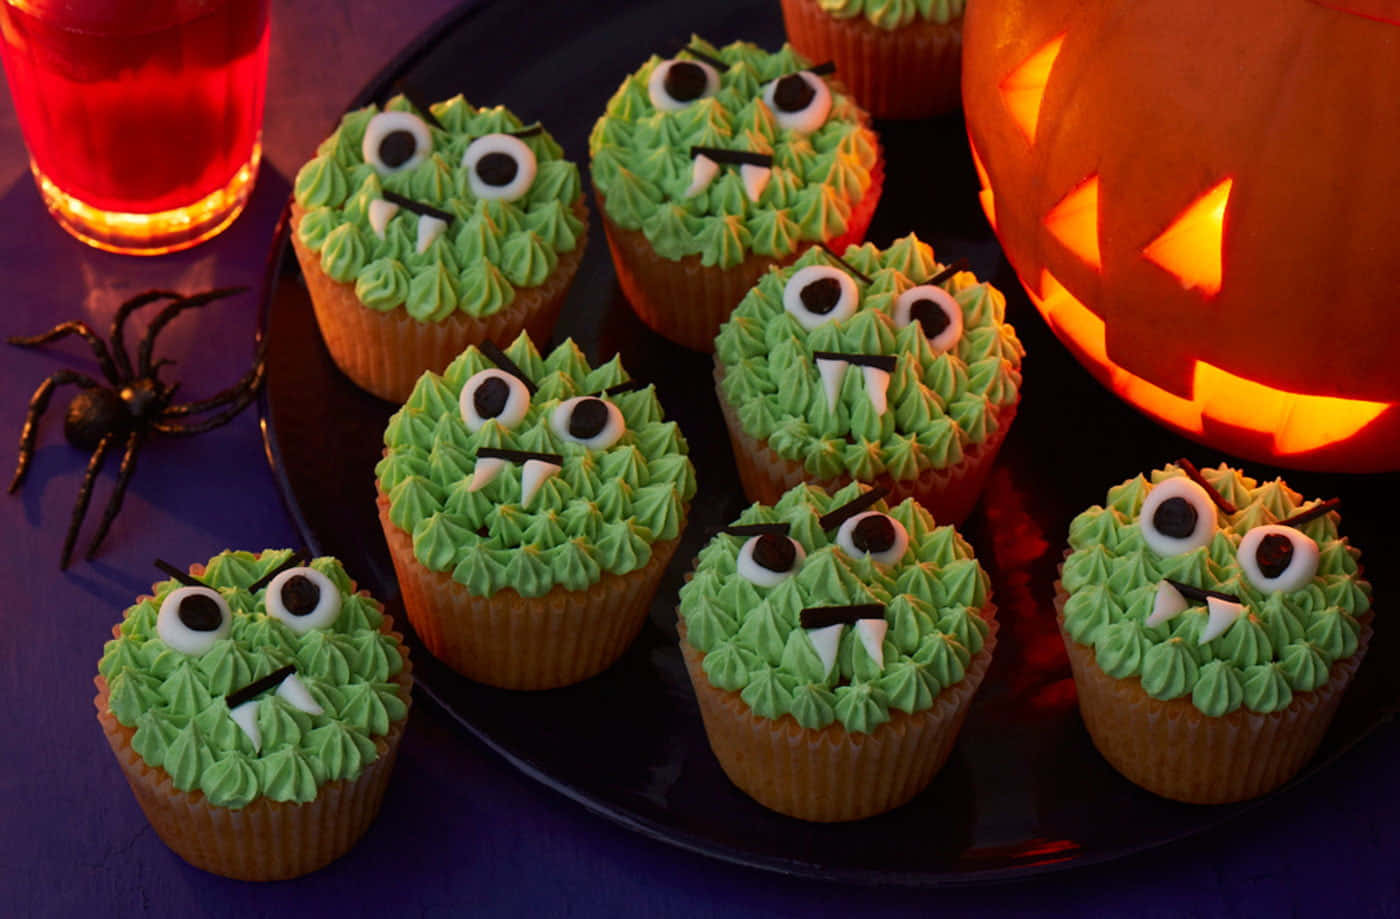 Trick or Treat! Make a special batch of Halloween cupcakes this holiday. Wallpaper